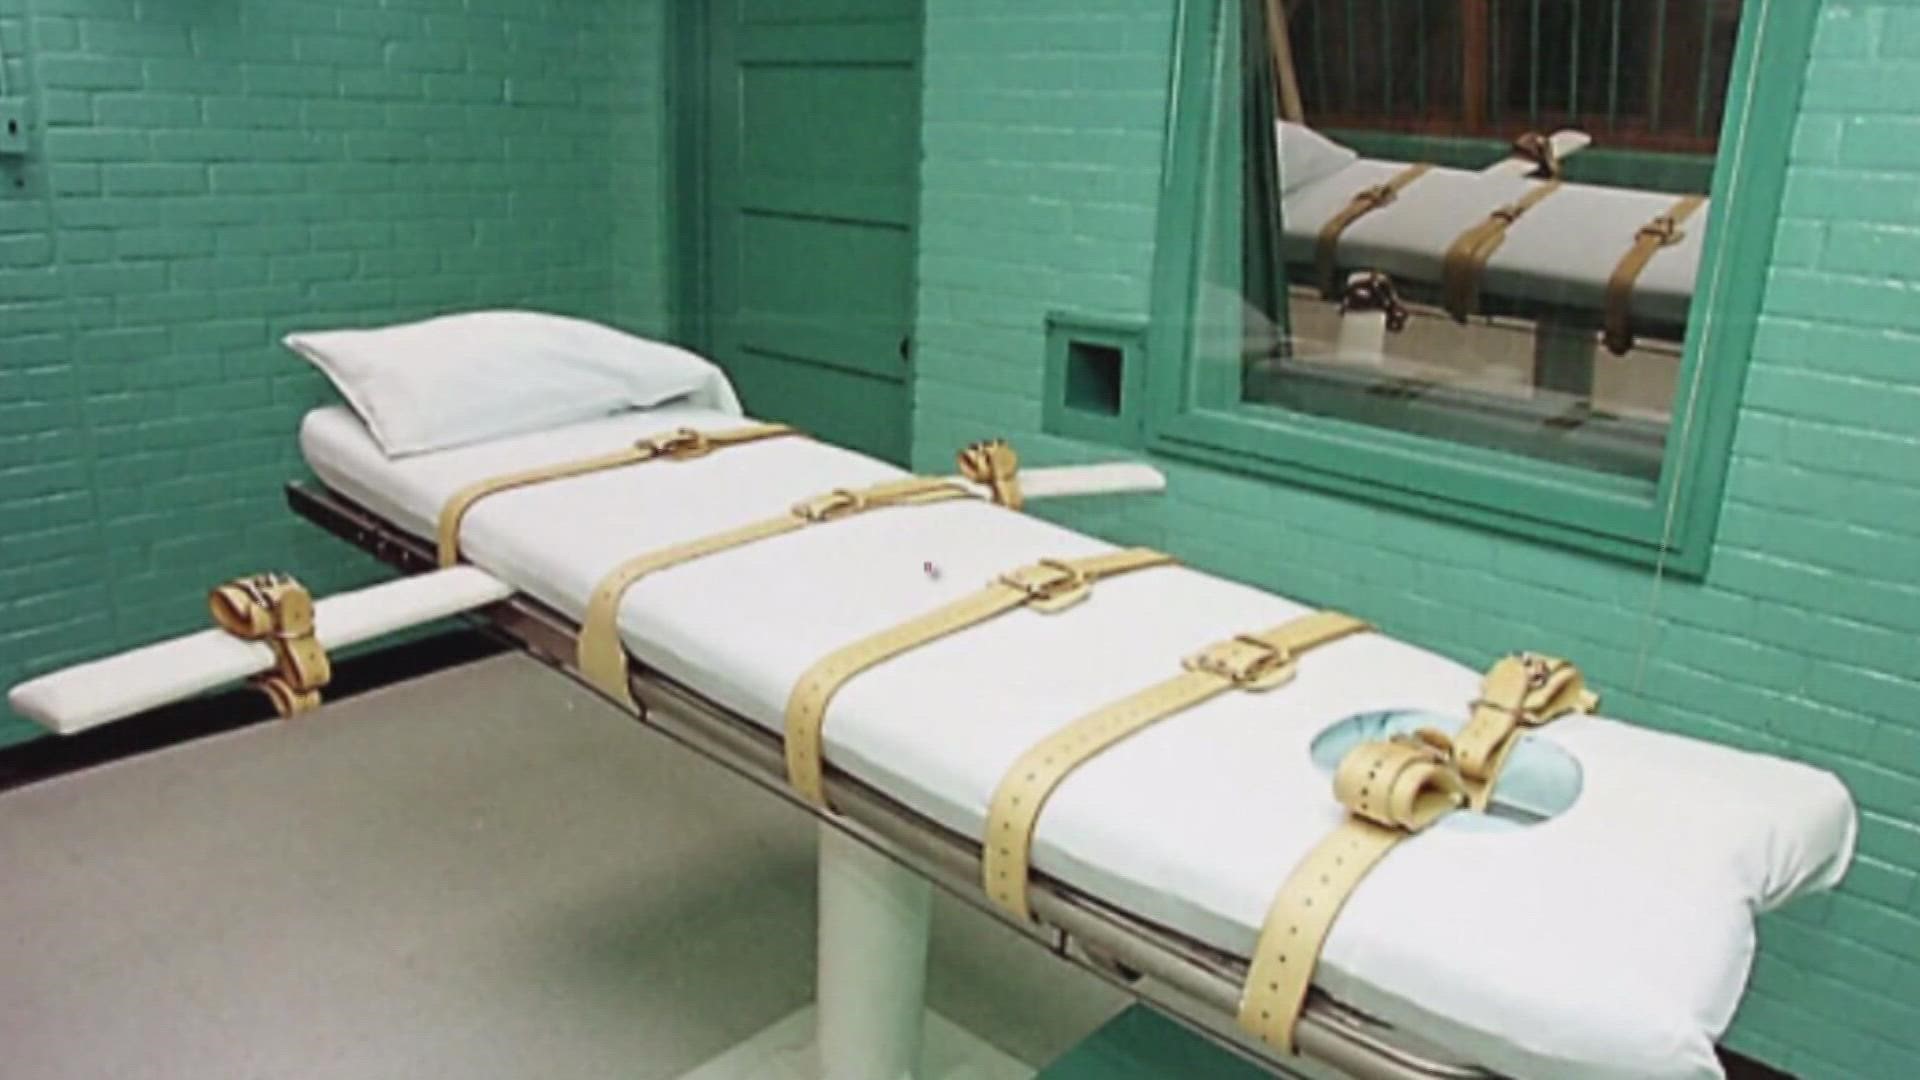 Arizona’s attorney general has put a hold on executions in the state until the completion of a review of death penalty protocols ordered by the Gov. Katie Hobbs.